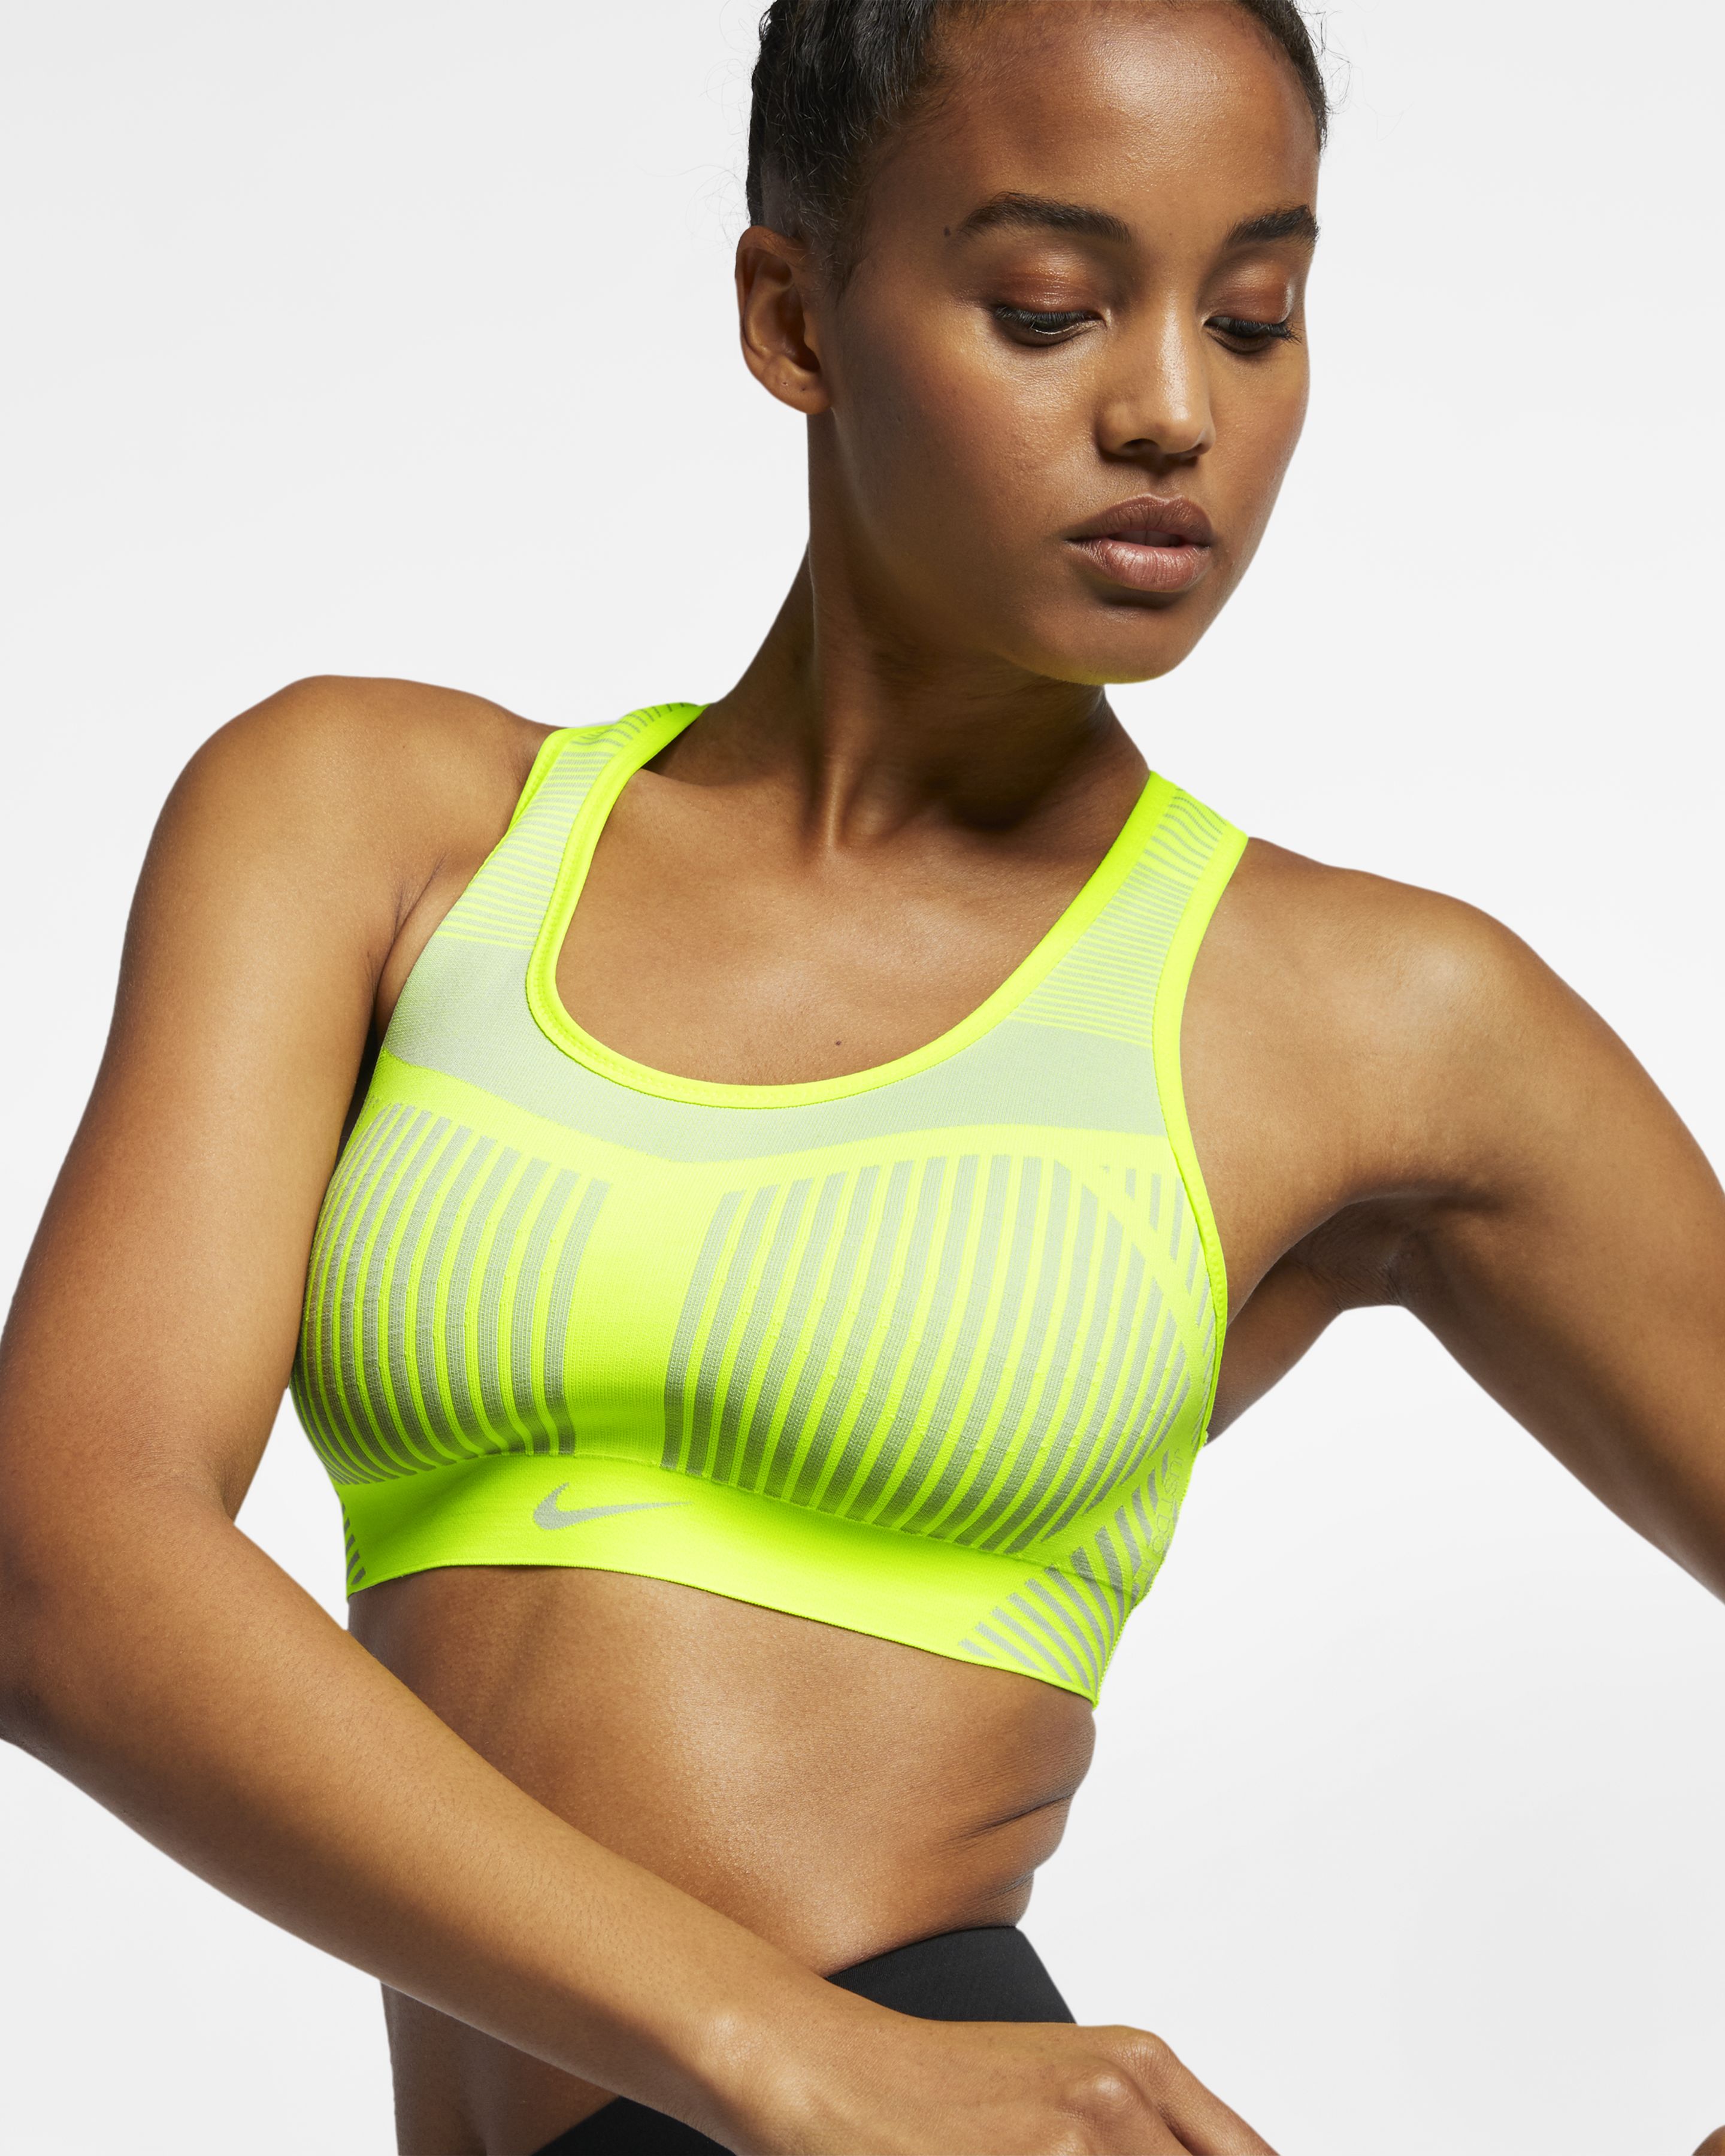 17 Best High-Impact Sports Bras for Women 2021 - Supportive Sports